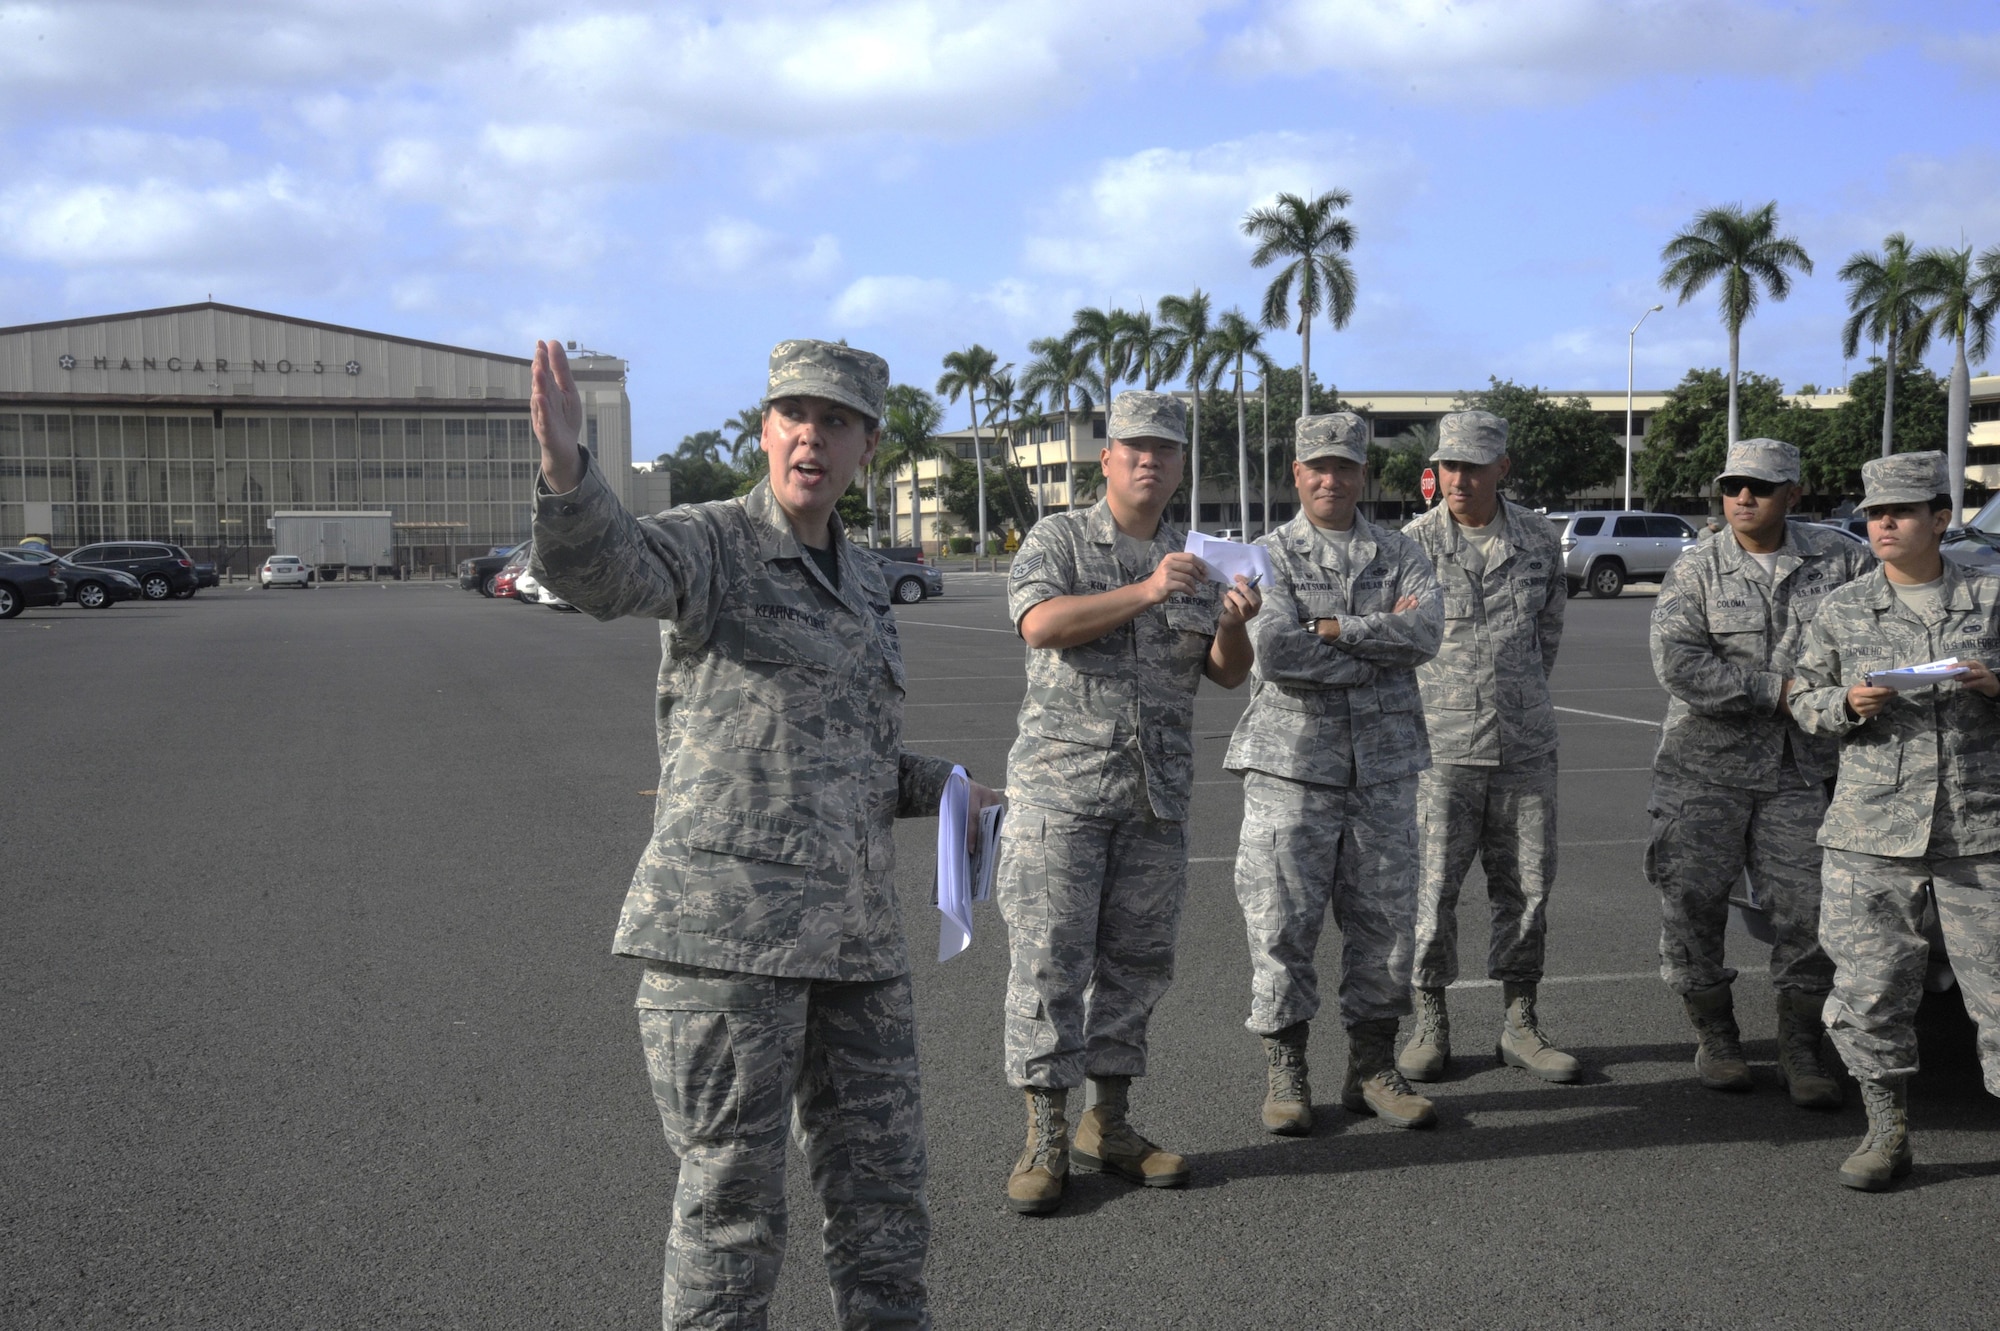 Reserve Citizen Airman Tech. Sgt. Christine Kearney-Kurt, a historian for the 624th Regional Support Group, explains the historic significance of the Base Operations building during a battlefield staff ride at Joint Base Pearl Harbor-Hickam, Hawaii, Dec. 3, 2017. The tour focused on the remnants of war from 76 years ago during the Dec. 7, 1941, attack at Hickam Field when America was launched into World War II. (U.S. Air Force photo by Master Sgt. Theanne Herrmann)